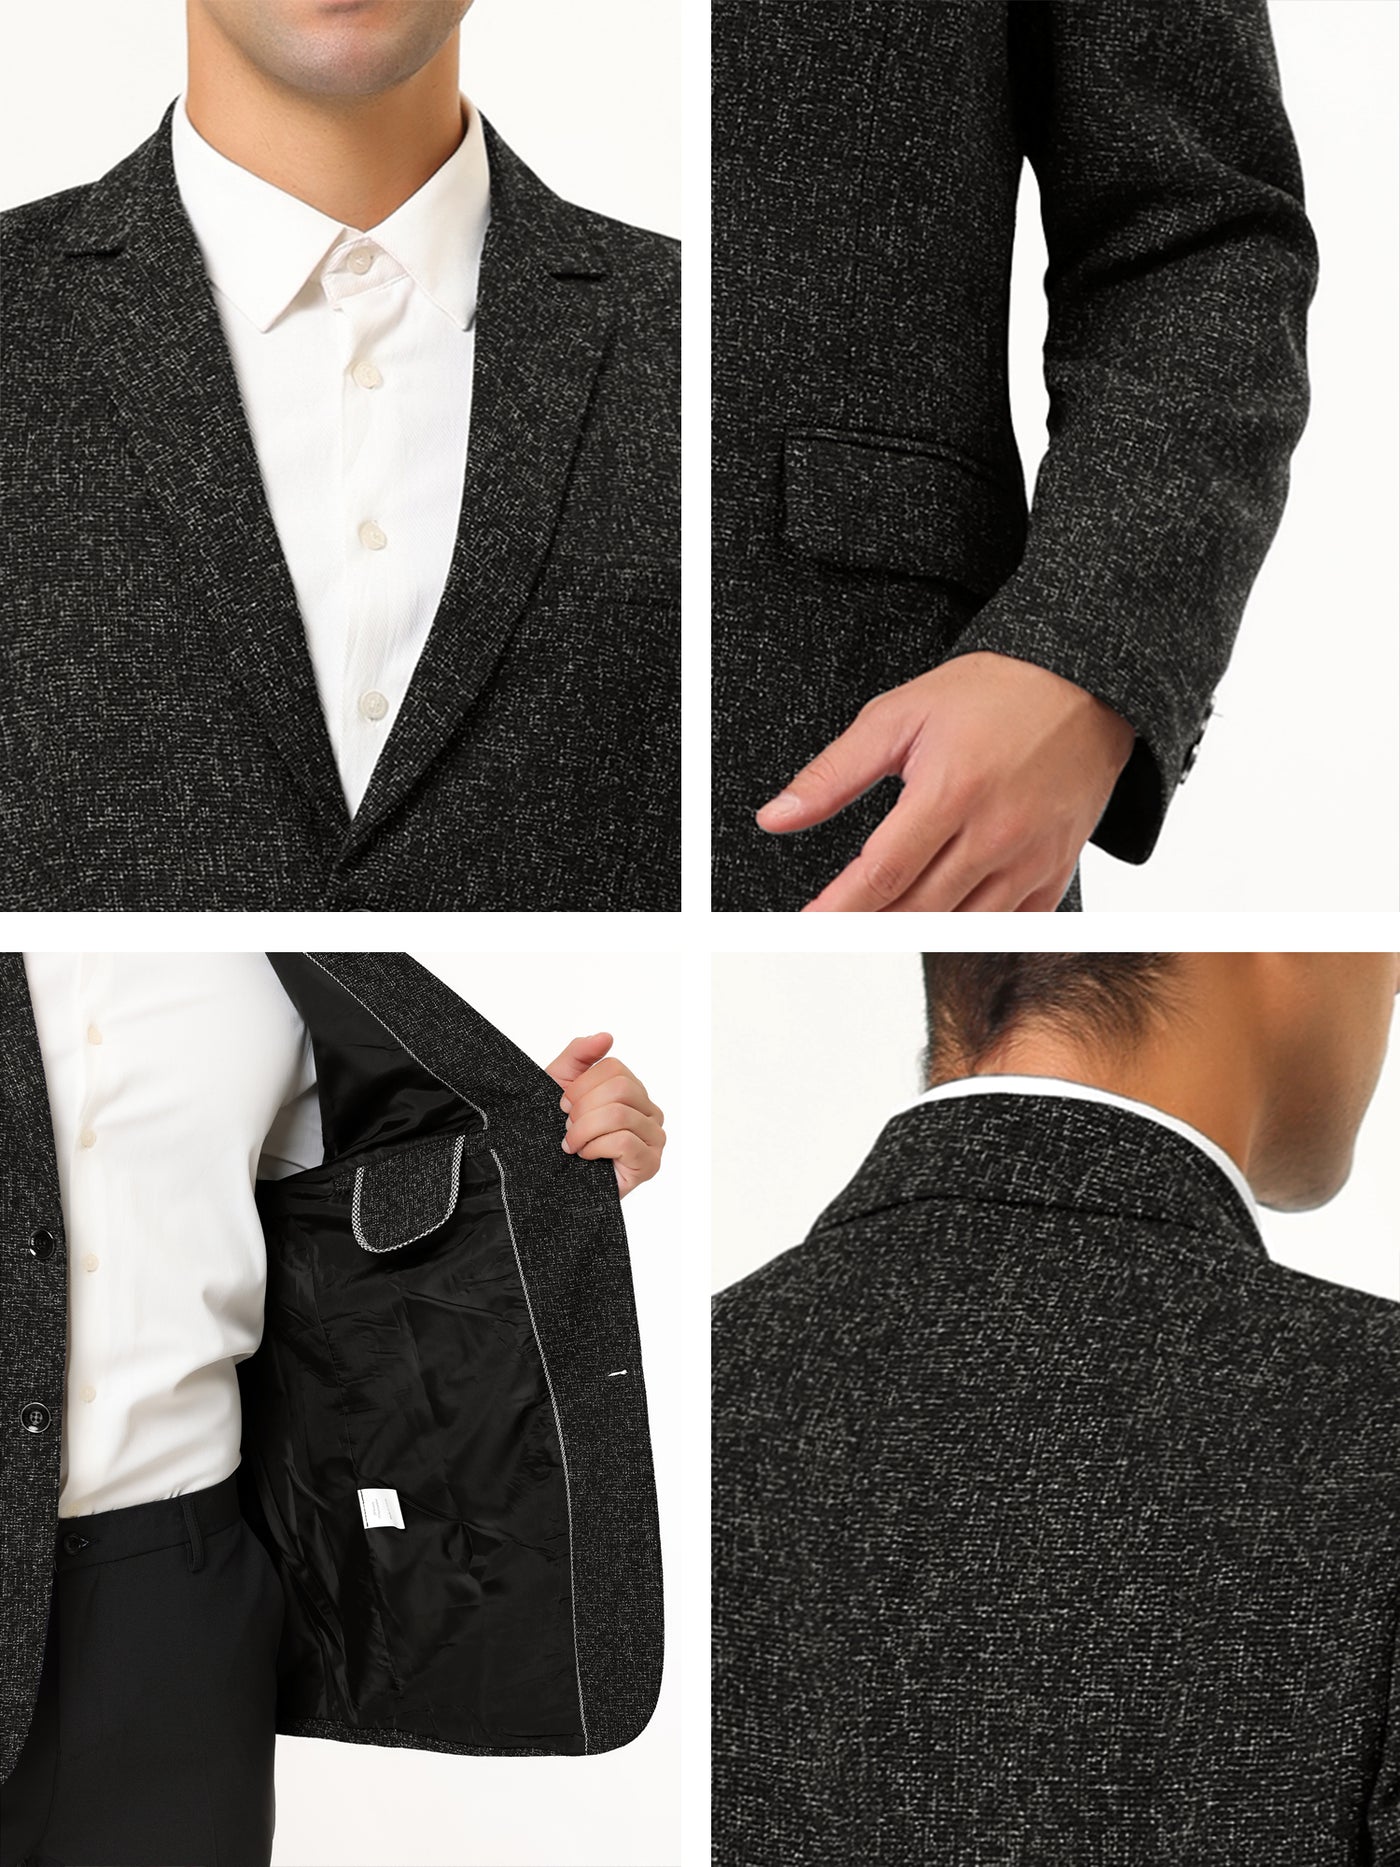 Bublédon Single Breasted Solid Formal Business Suit Blazer